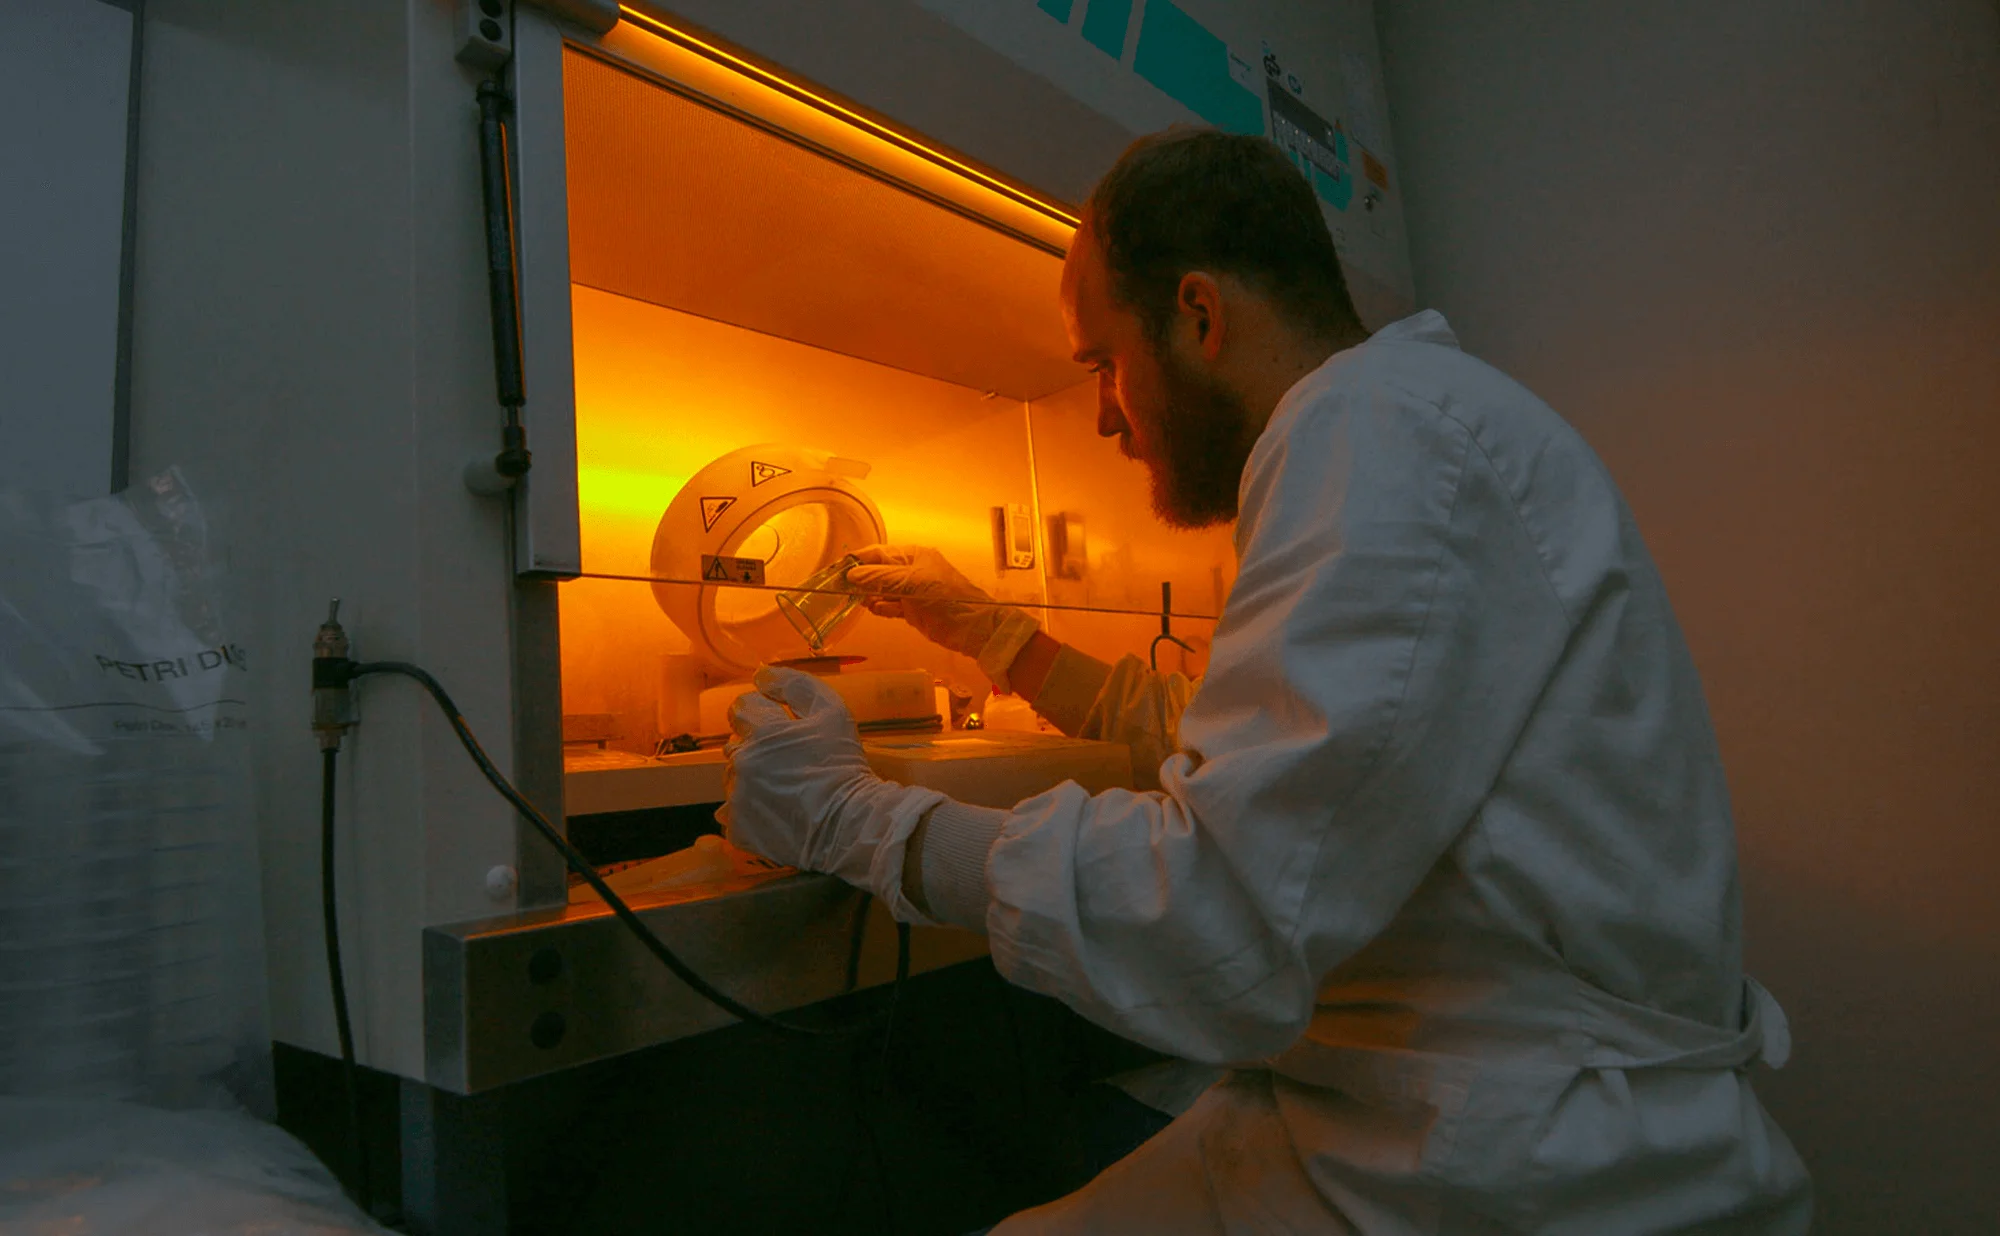 Benjamin Sévénié, PhD working under the laboratory hood with the spin coater, making SU-8 mold at Blackhole Lab. | Photo credit: Julien Ridouard